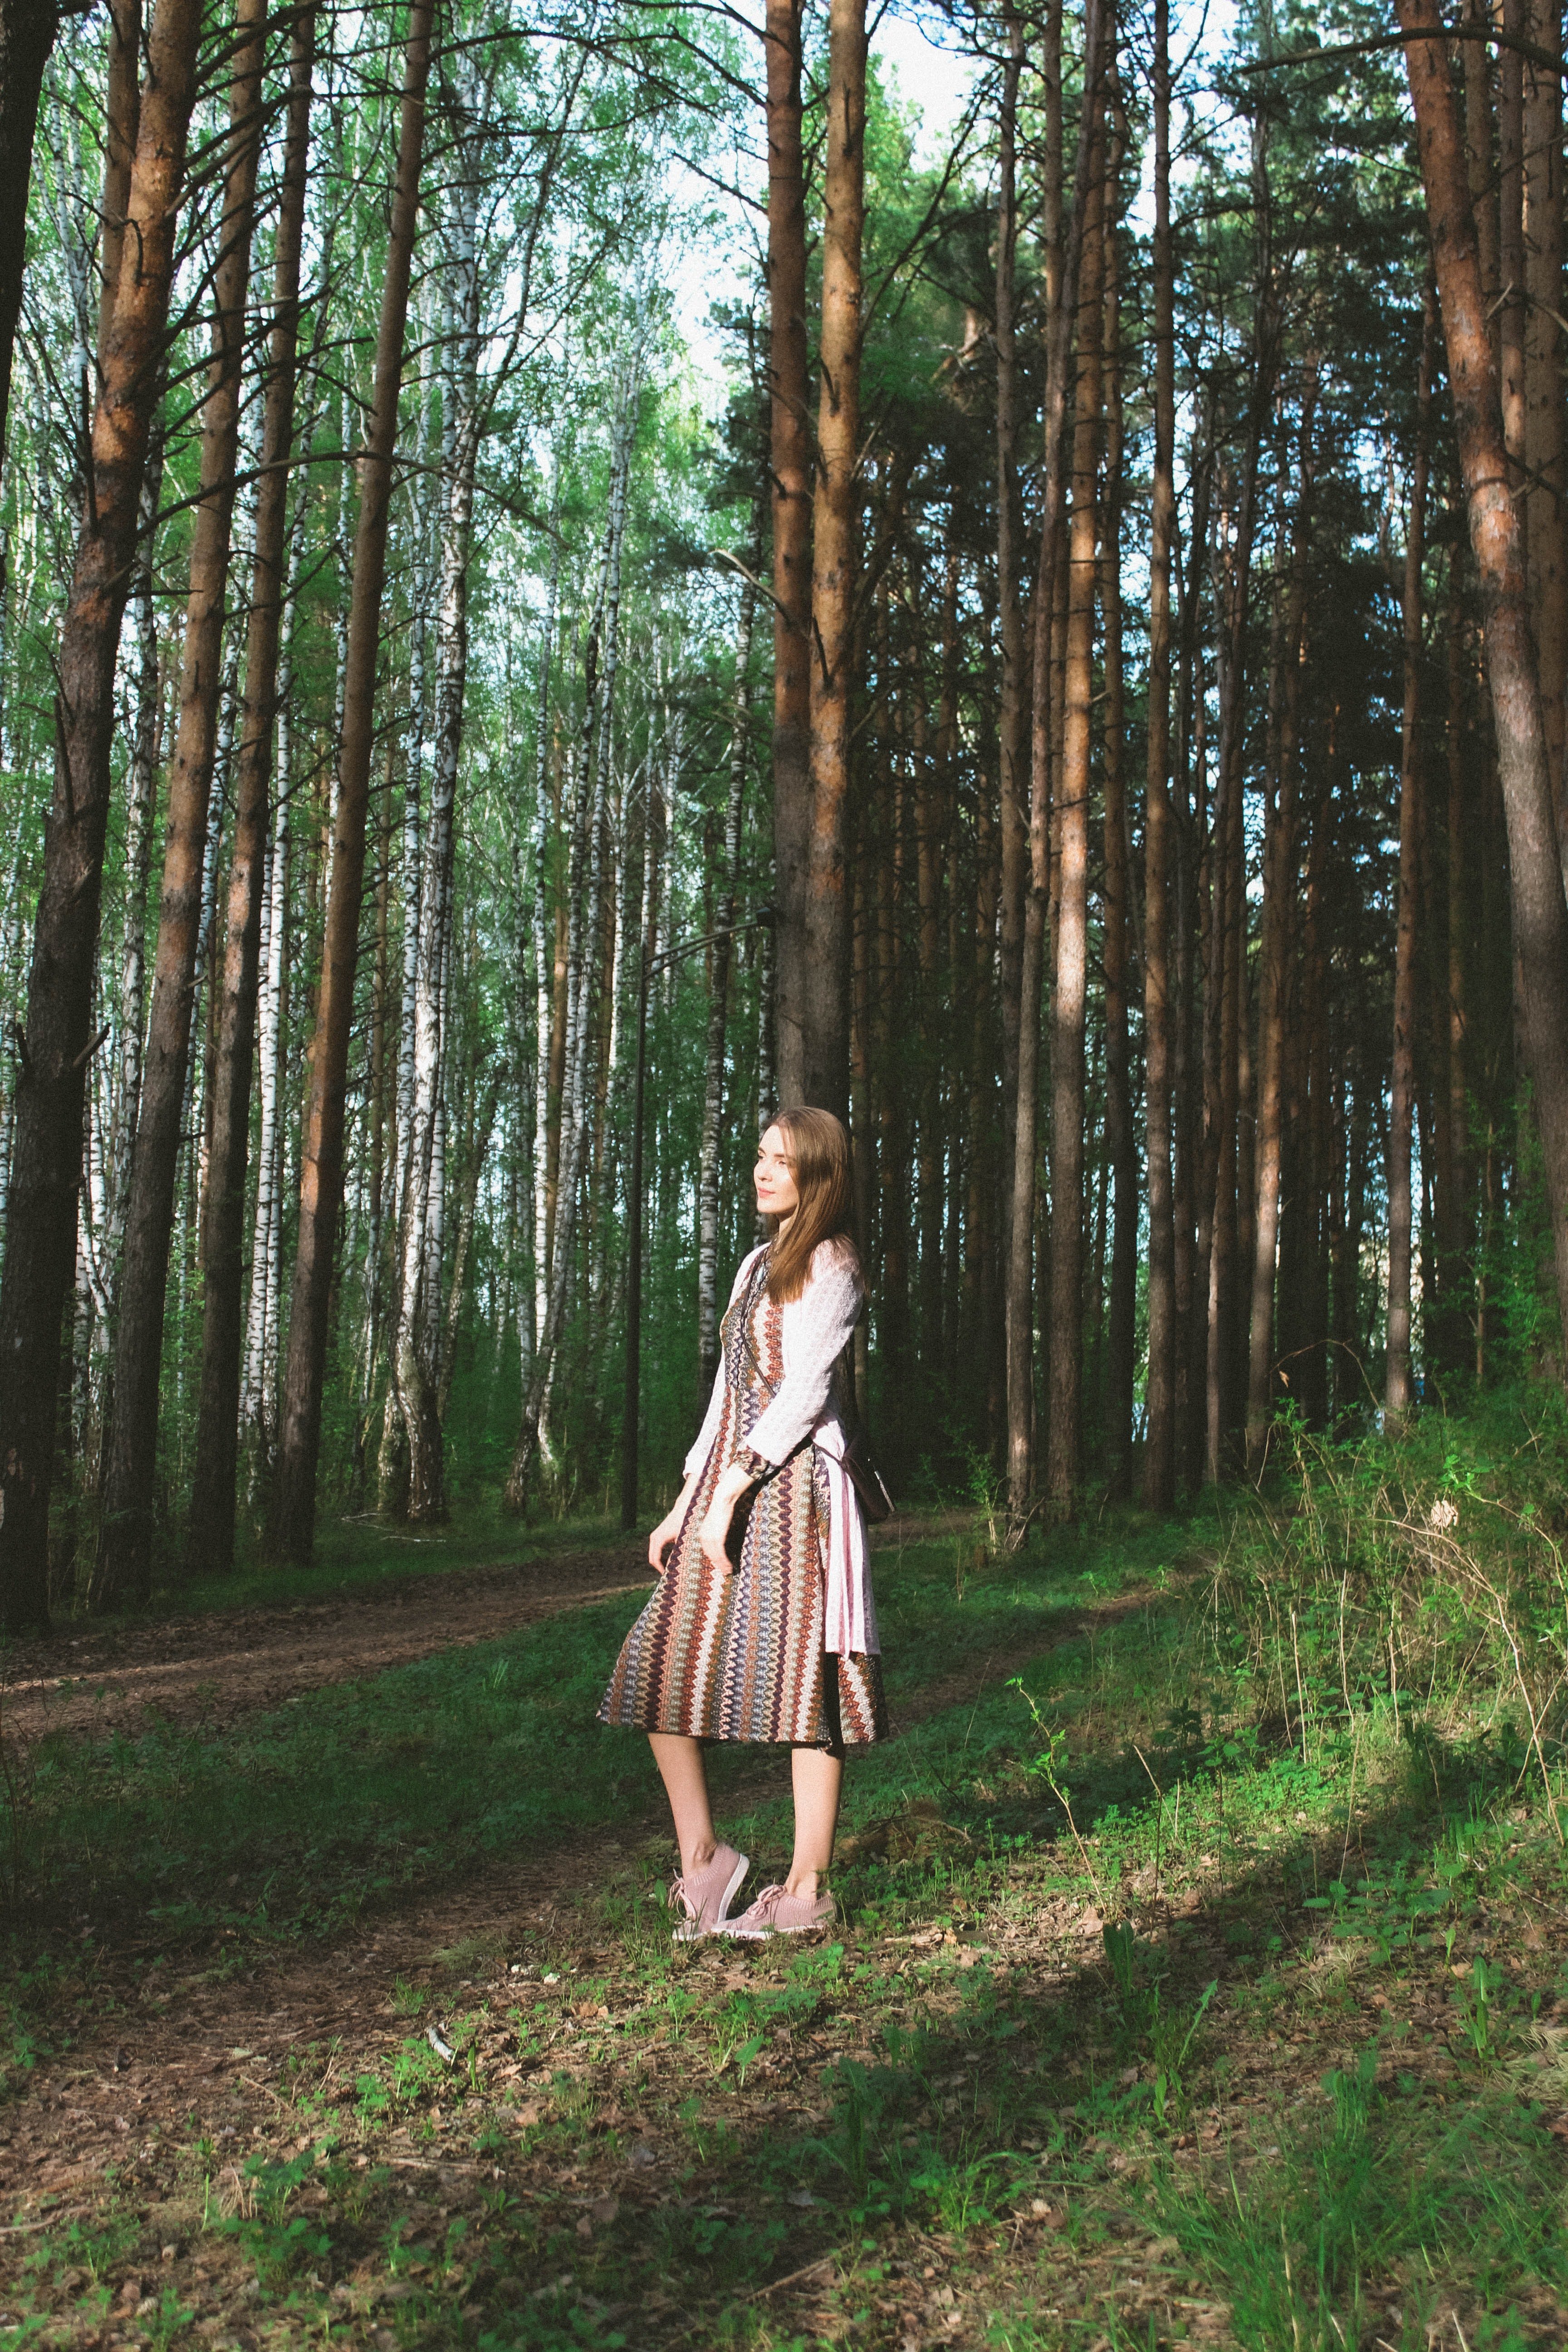 A woman in a dress standing in the forest. | Pexels/ Angelina Lobanova